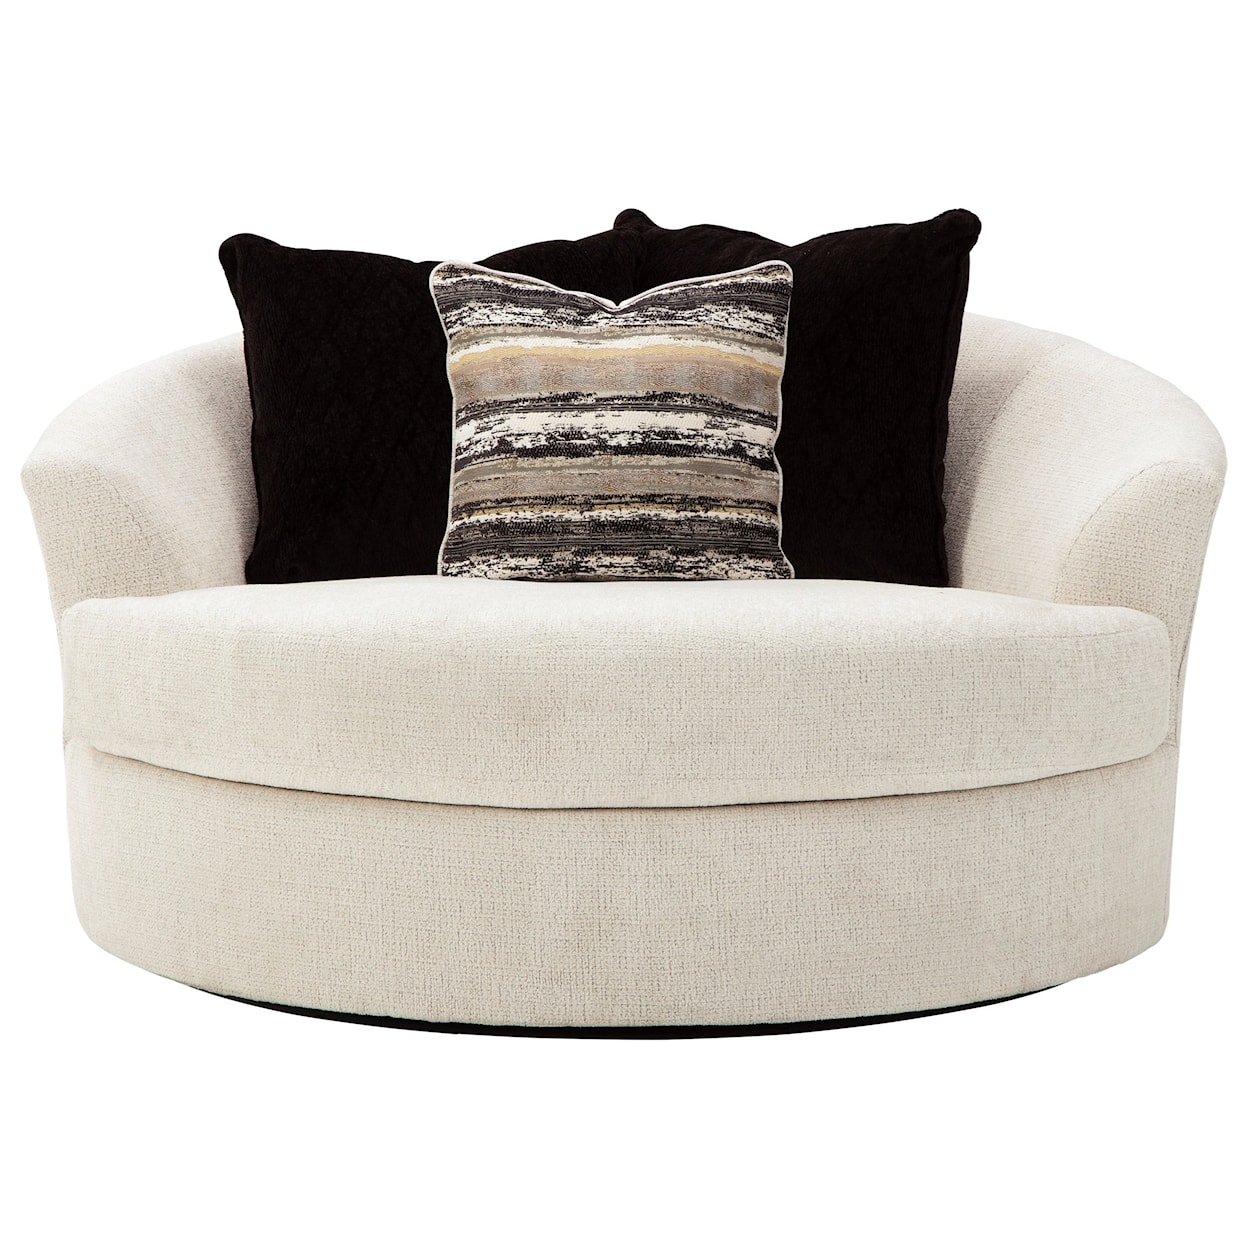 Signature Design by Ashley Furniture Cambri Oversized Round Swivel Chair